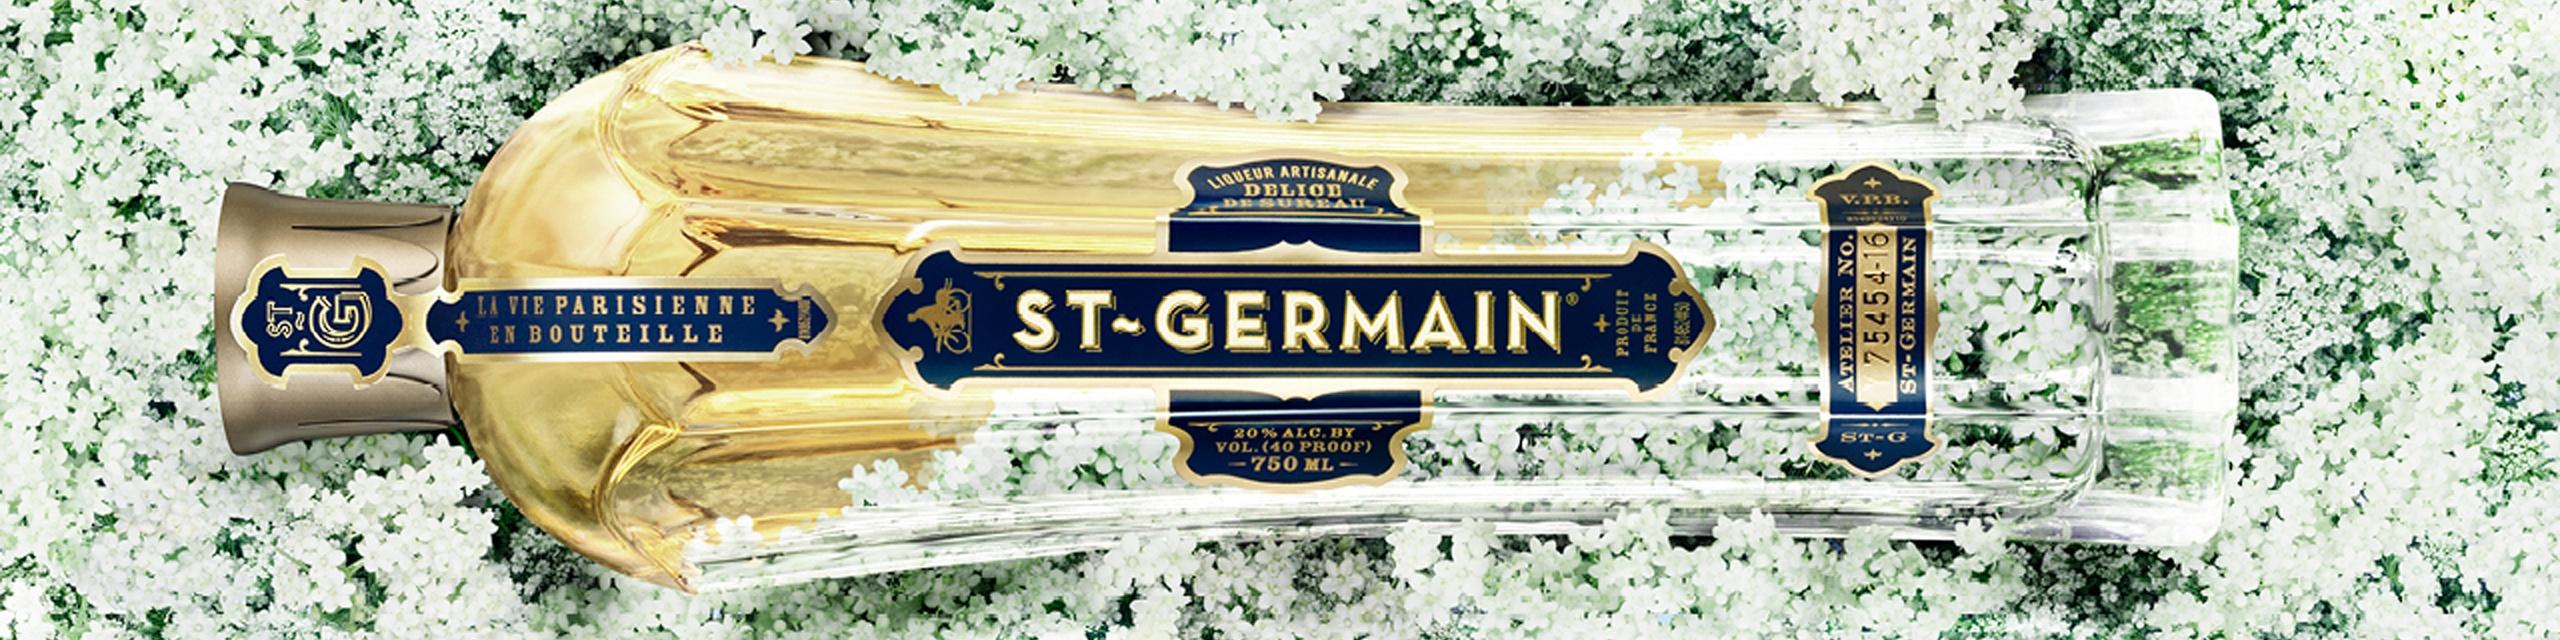 Buy St Germain online now from your nearby liquor store via Minibar Delivery.